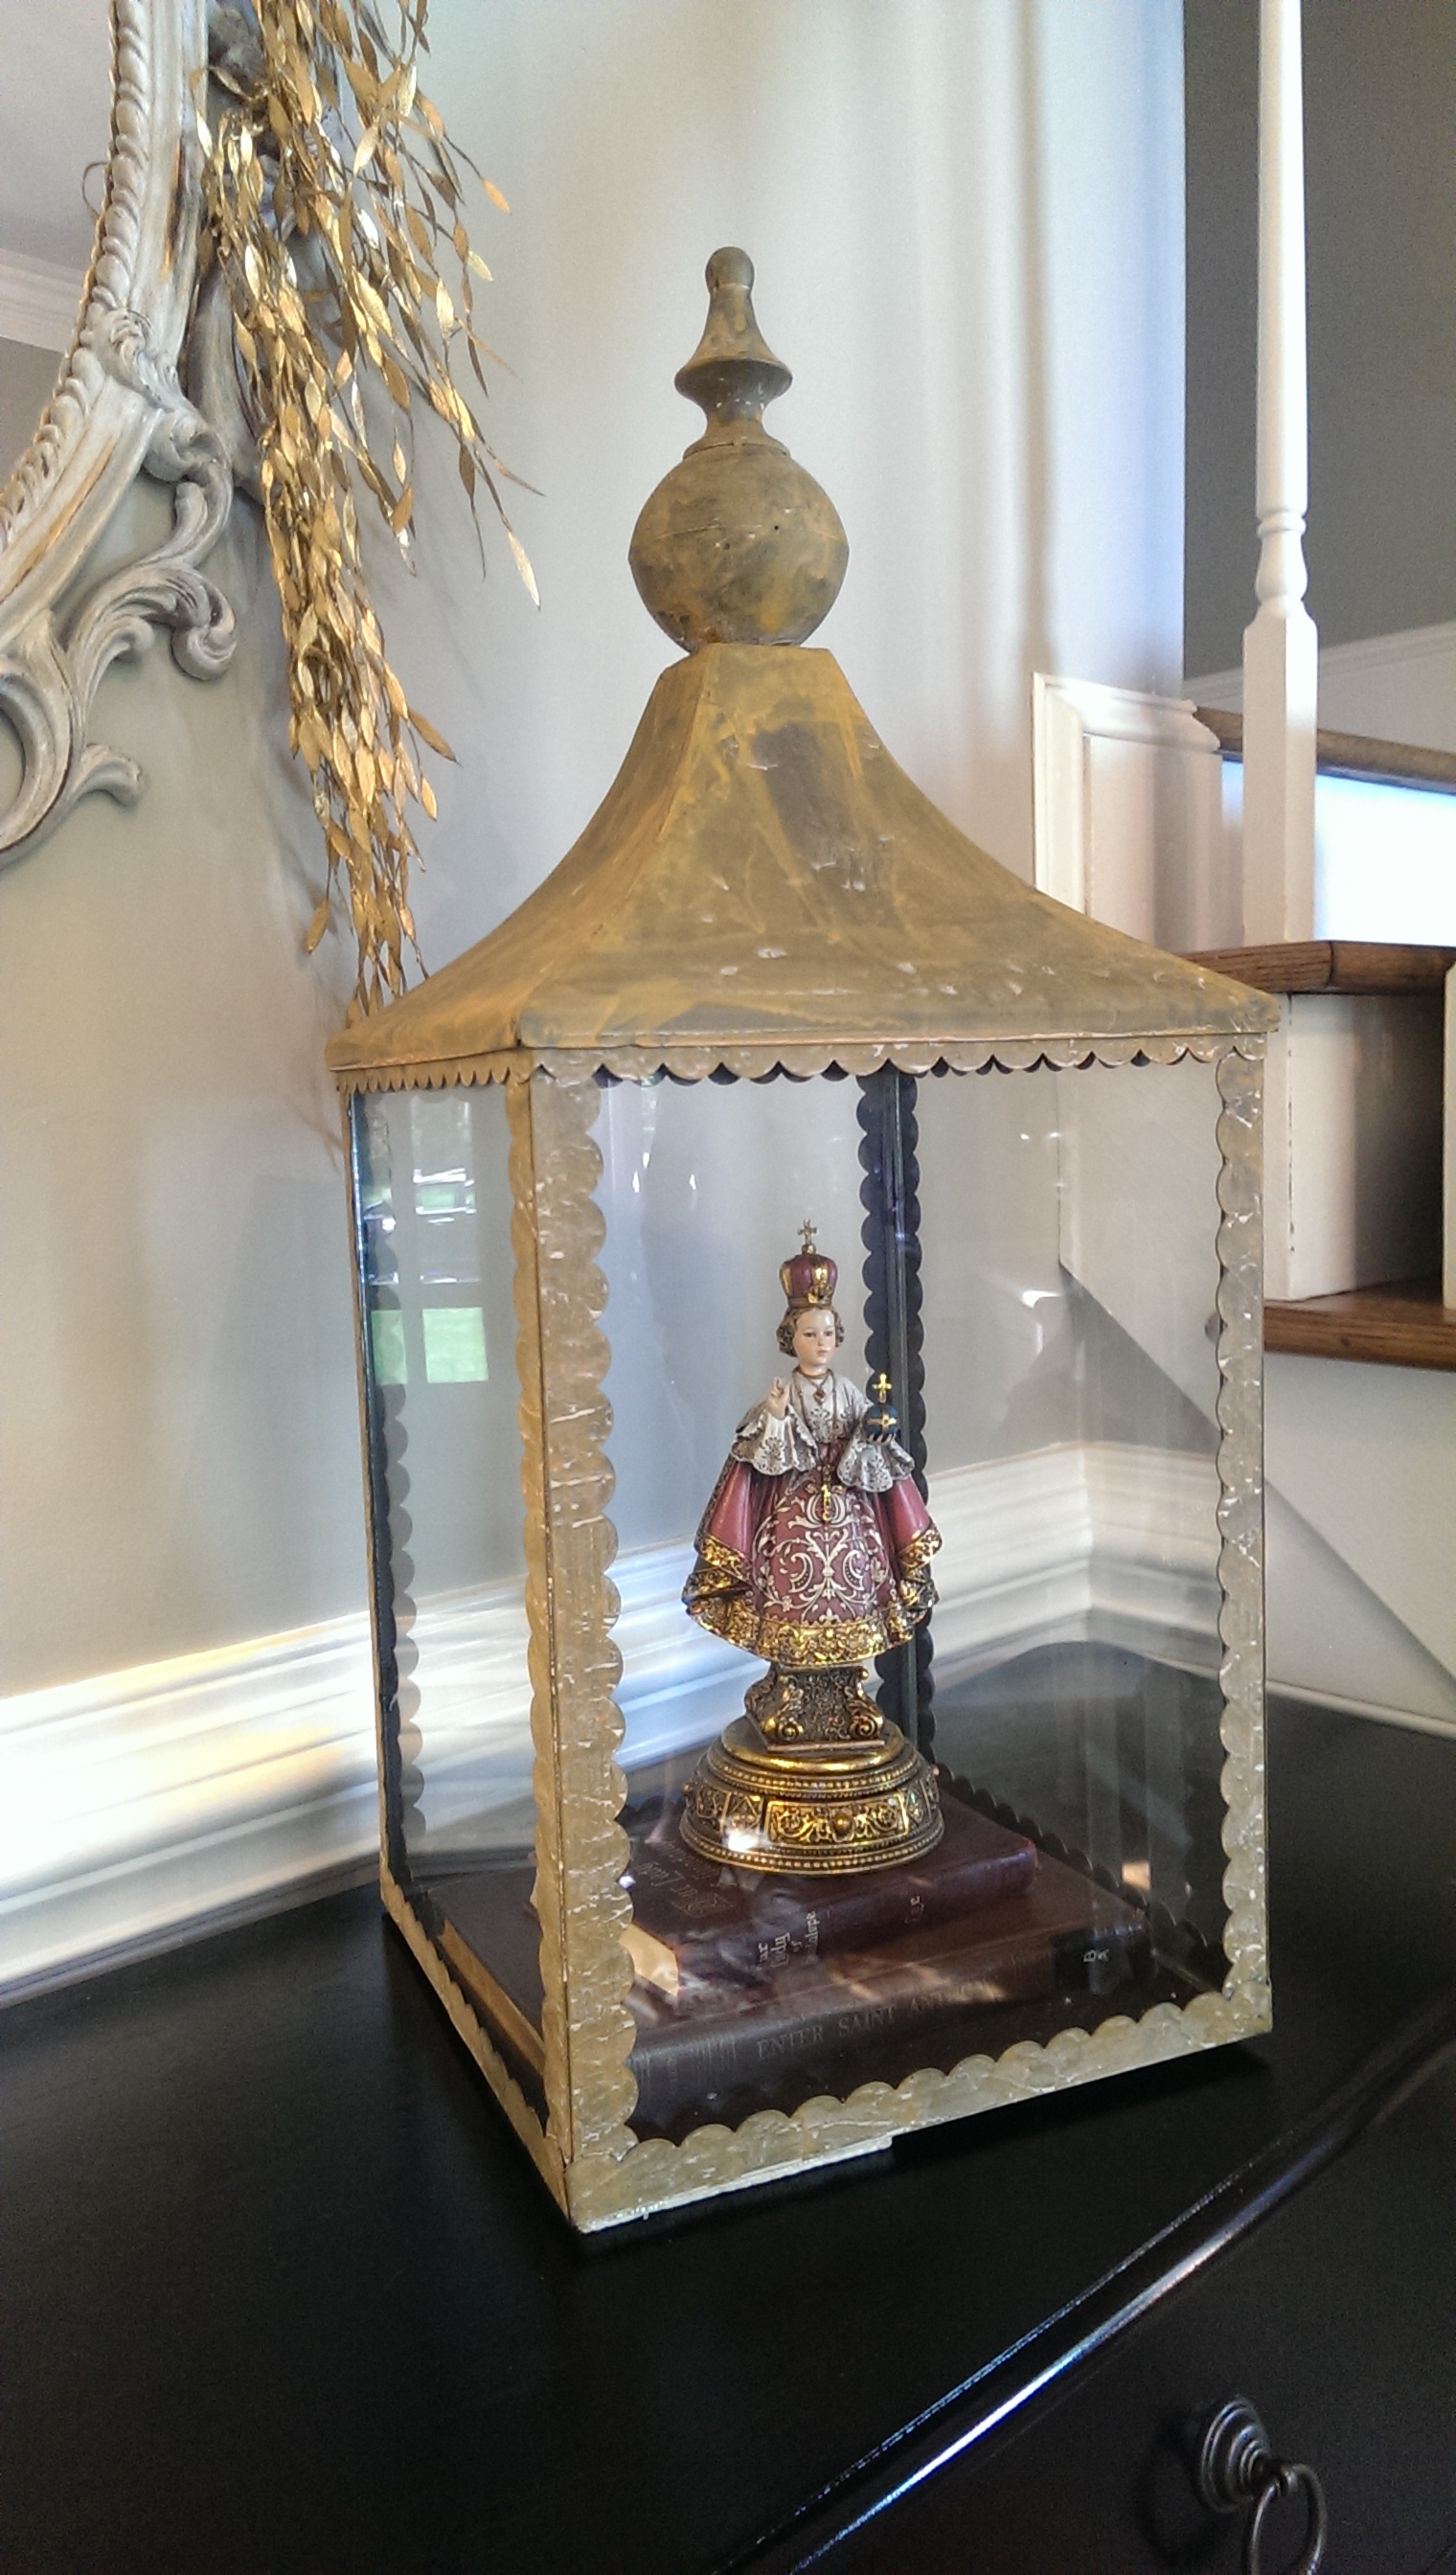 A neat way to display devotion to the Infant of Prague